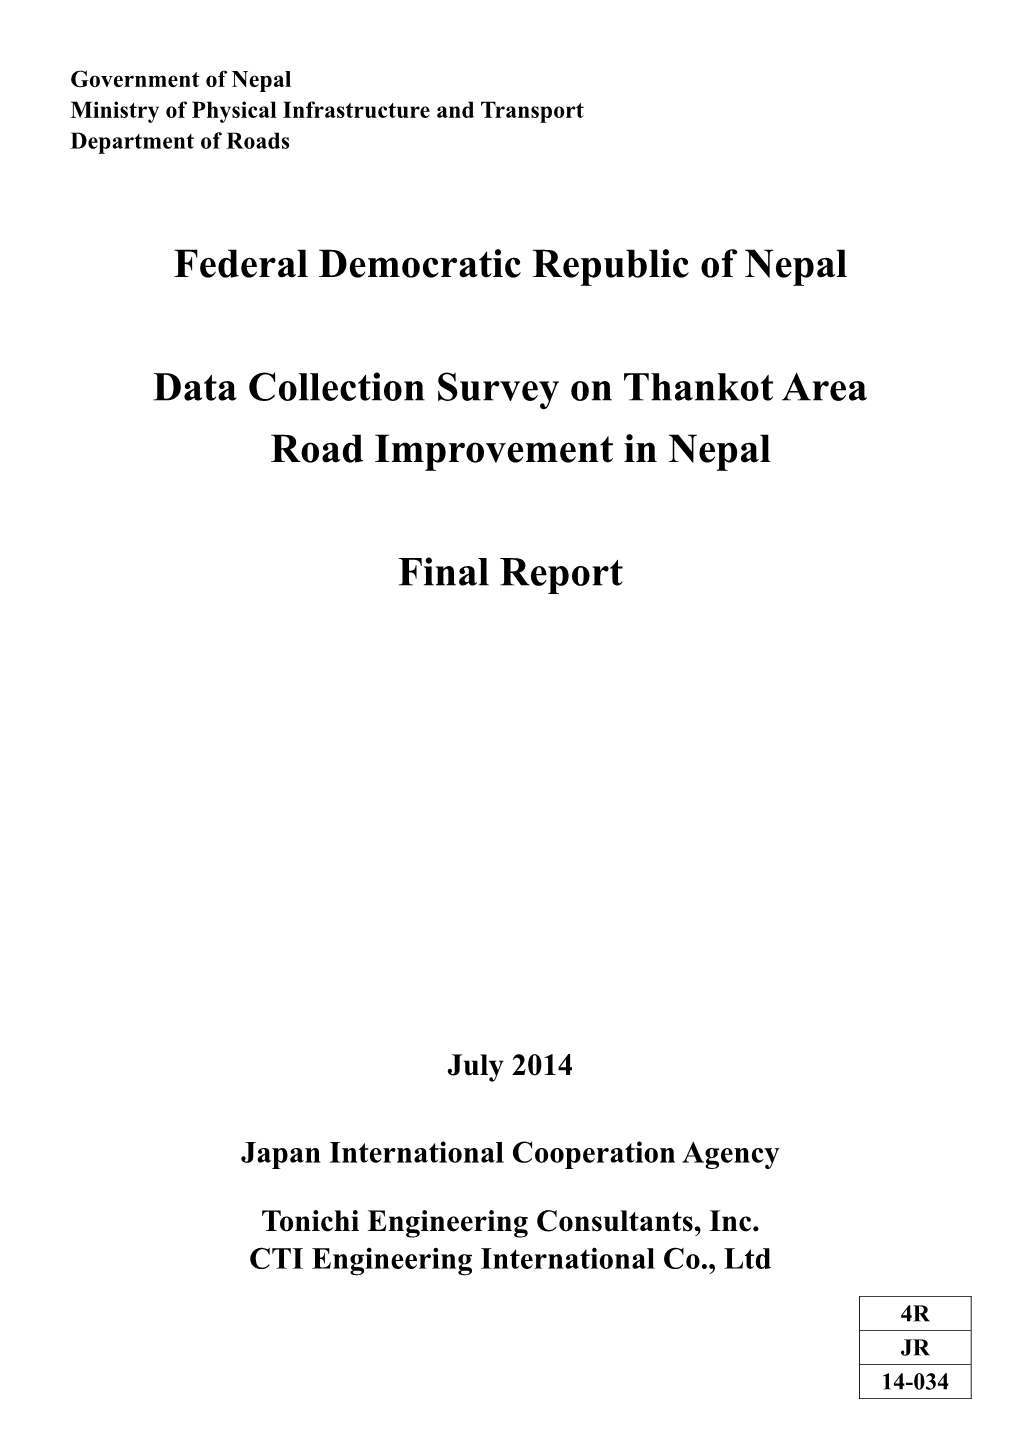 Federal Democratic Republic of Nepal Data Collection Survey on Thankot